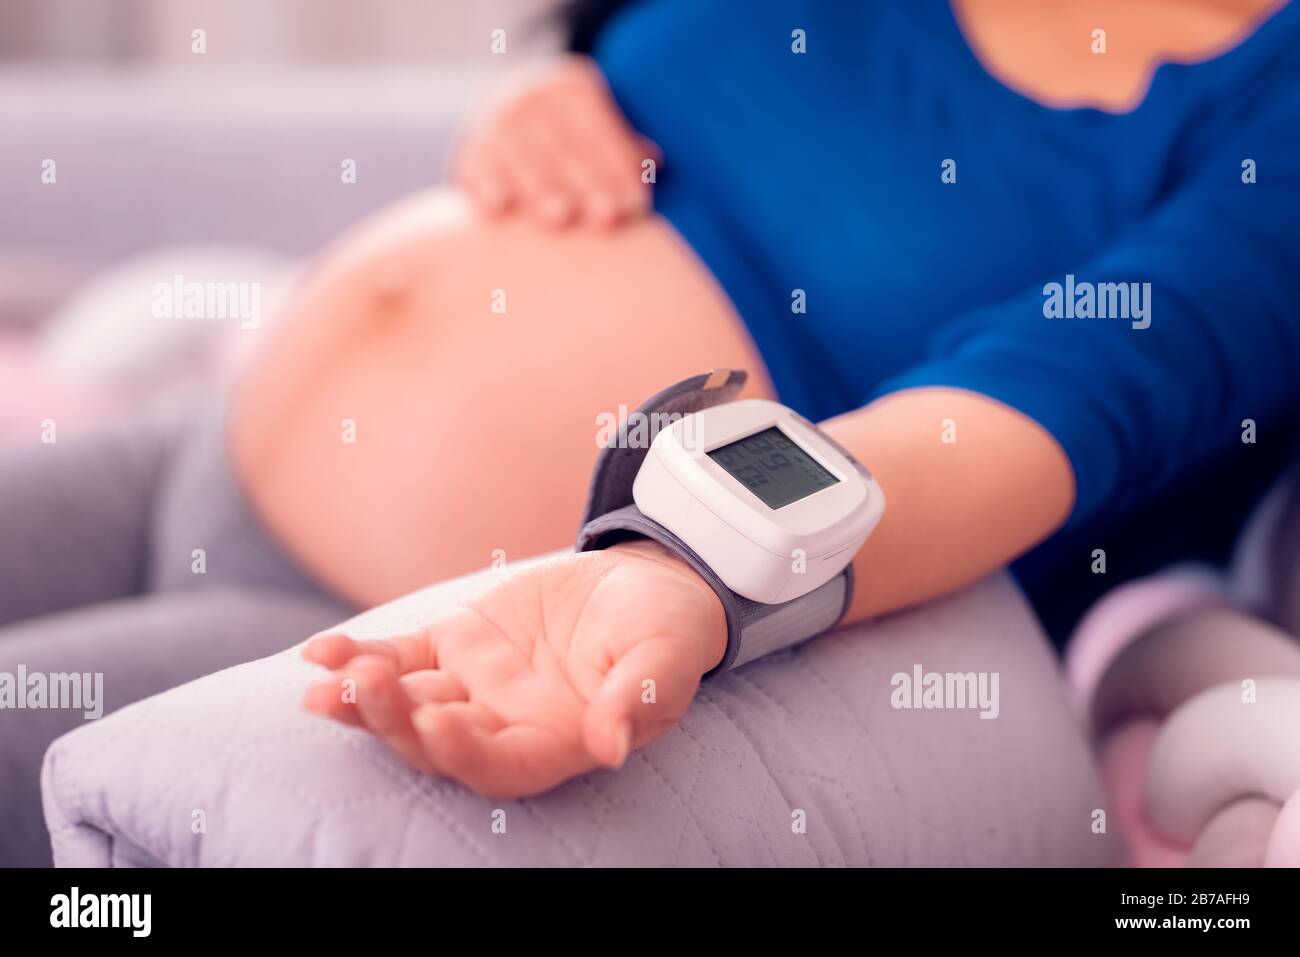 Pregnant woman monitoring her blood pressure at home with the medical device on her wrist and exposing her belly. Stock Photo